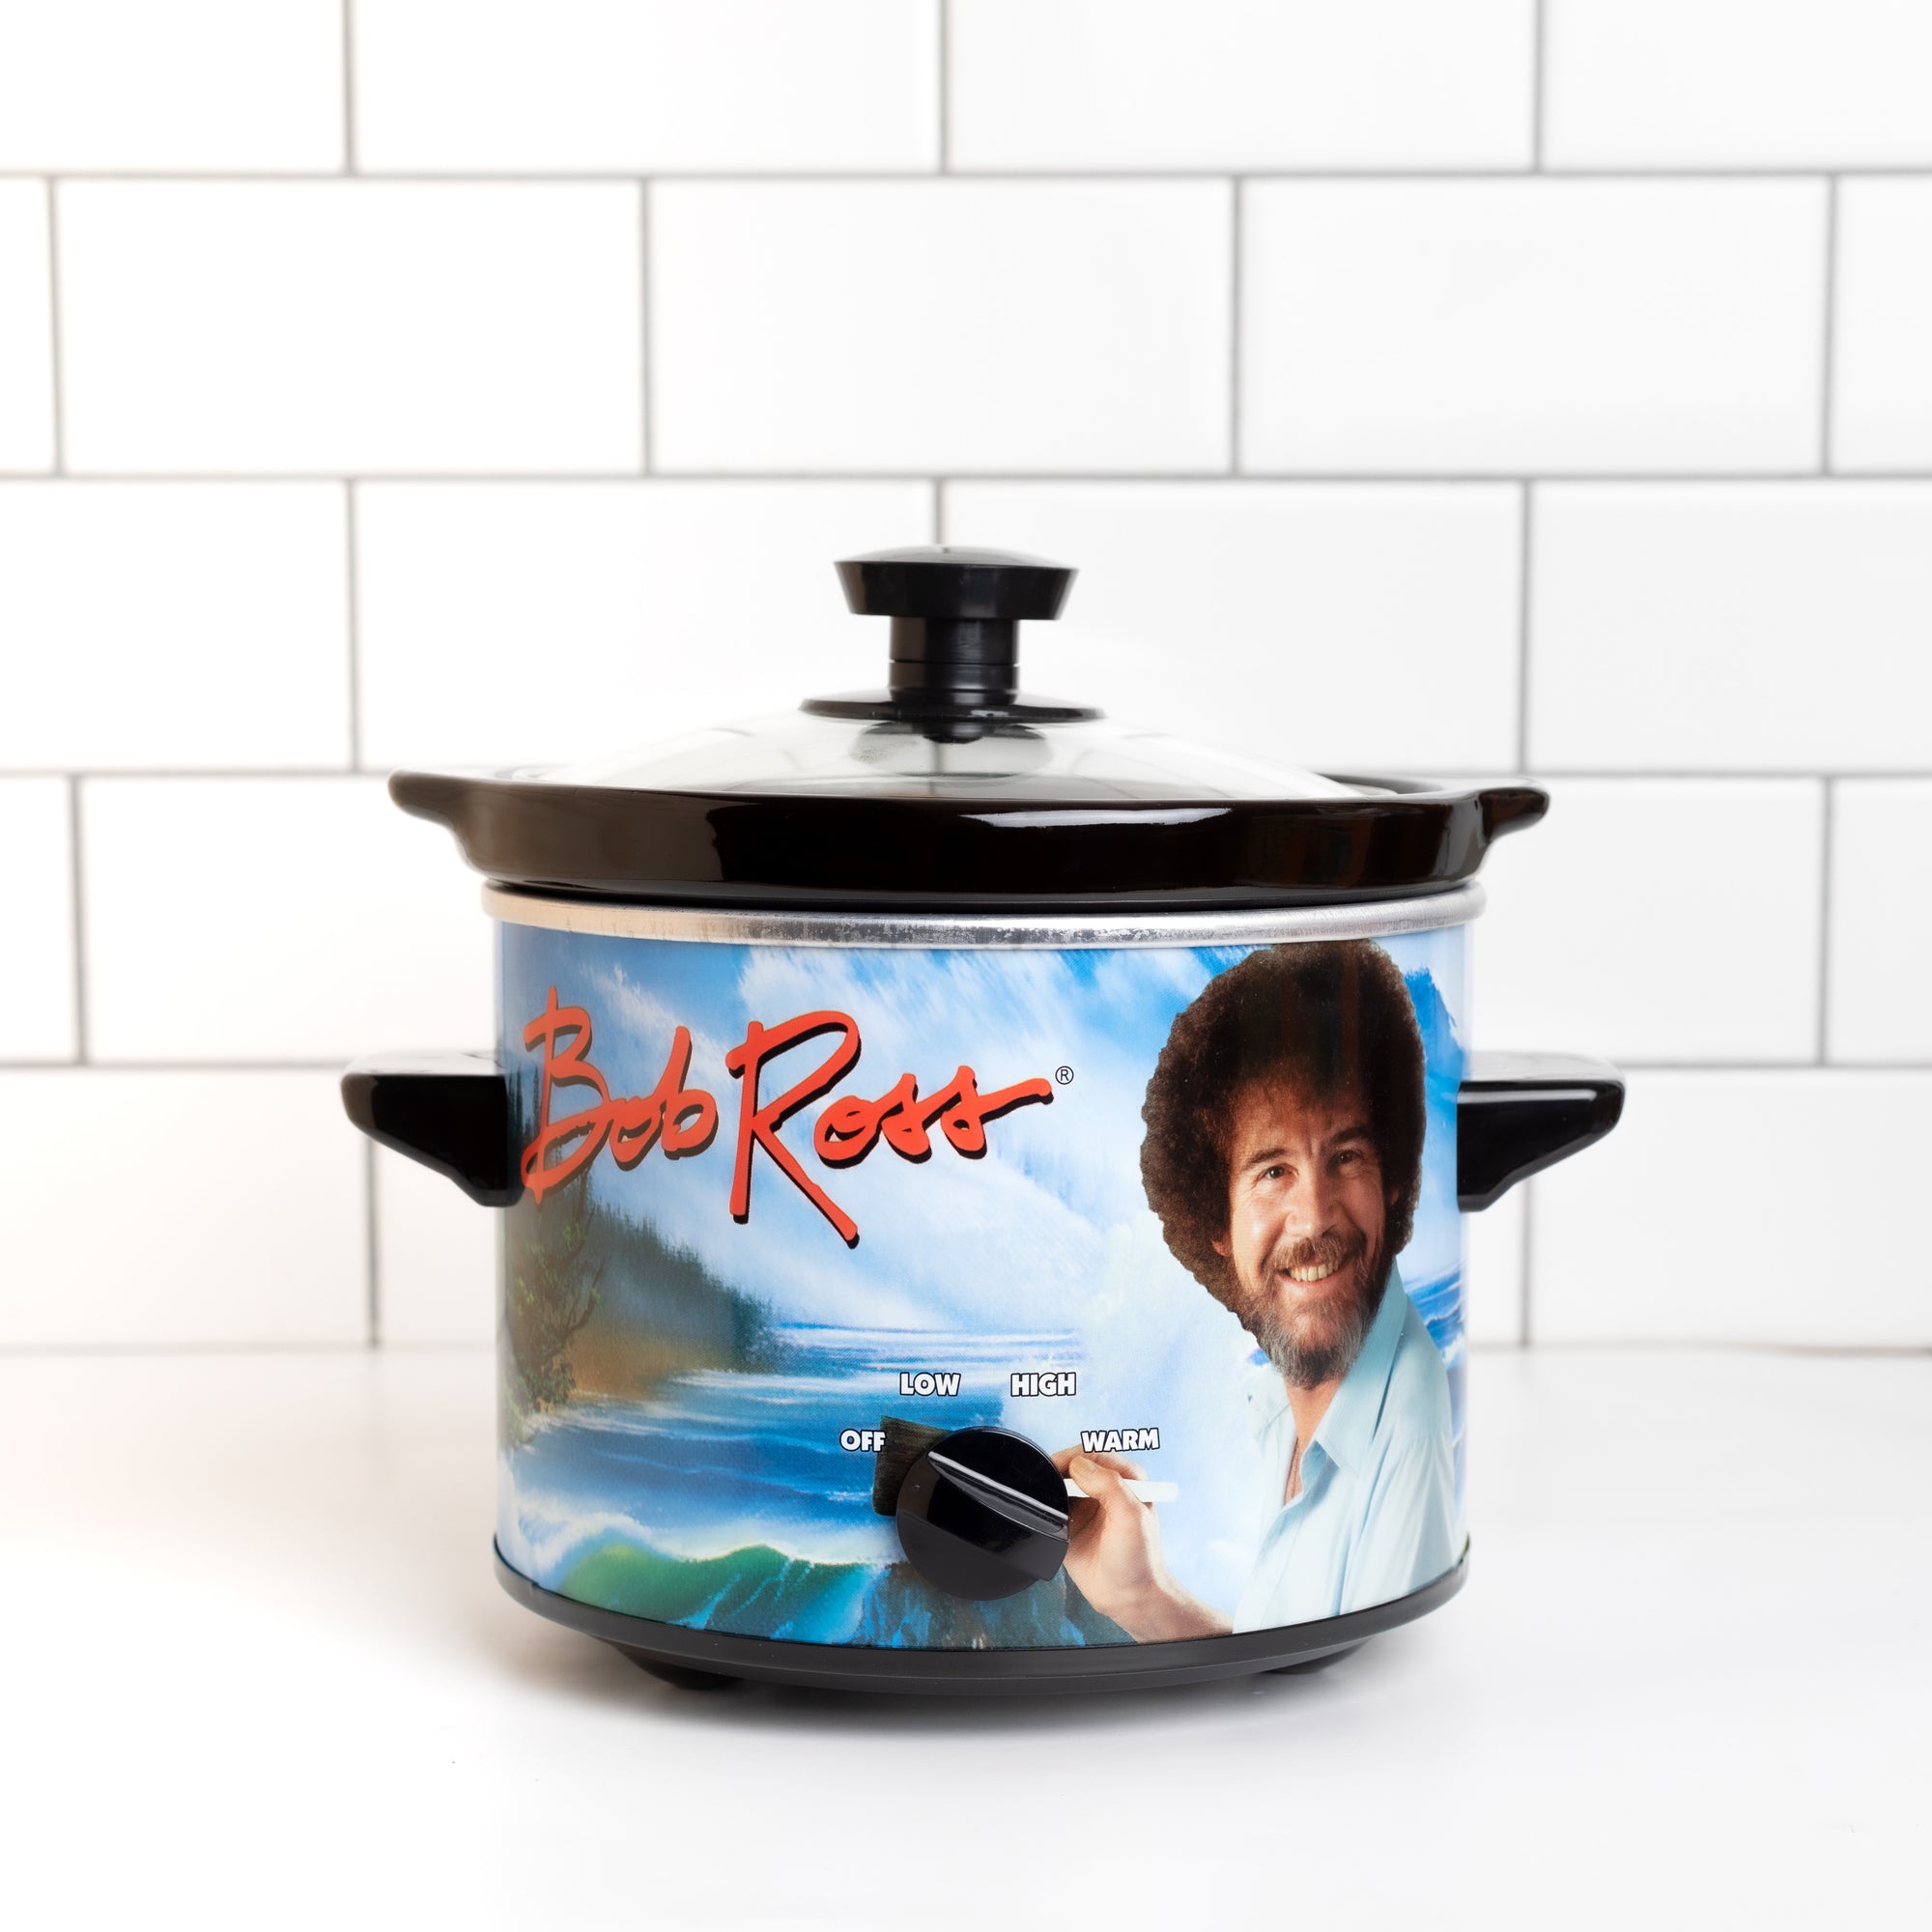 Bob Ross slow cooker next to box